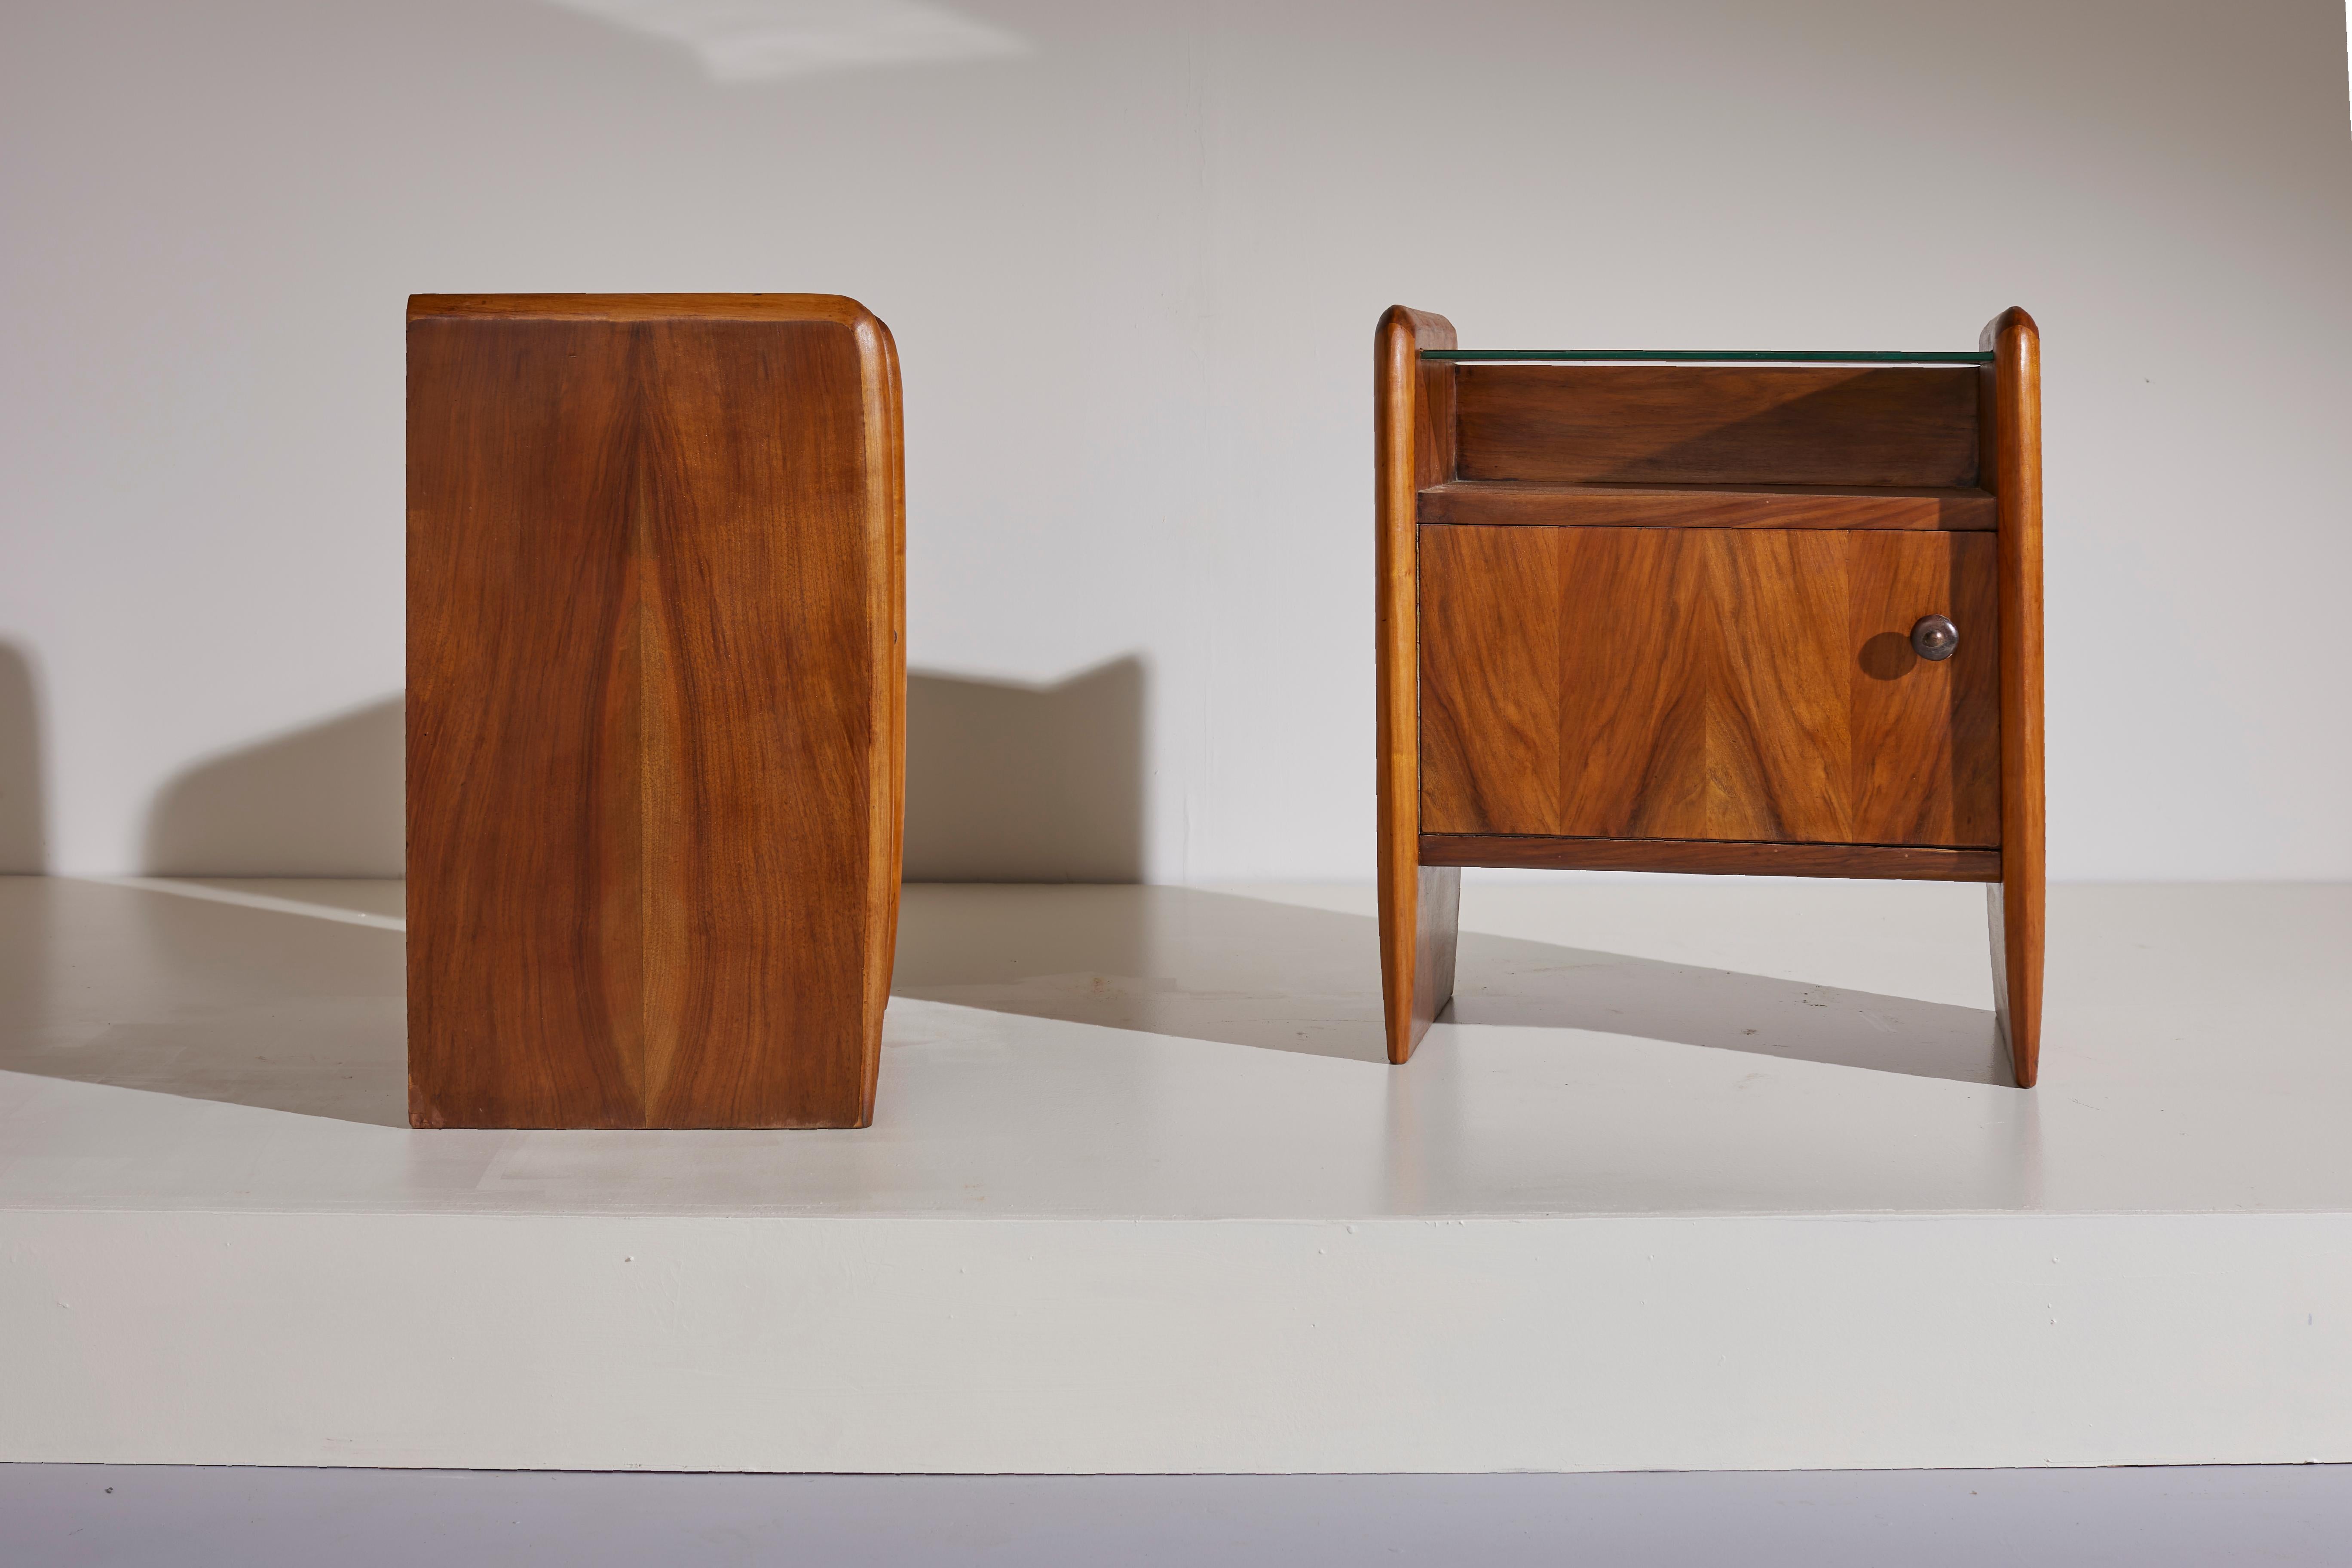 A pair of Italian midcentury nightstands/bedsides made in walnut and glass in the style of Osvaldo Borsani.
Their classical but extremely clean lines, their rounded profiles and their thin legs creates an elegant design which could fit both, modern